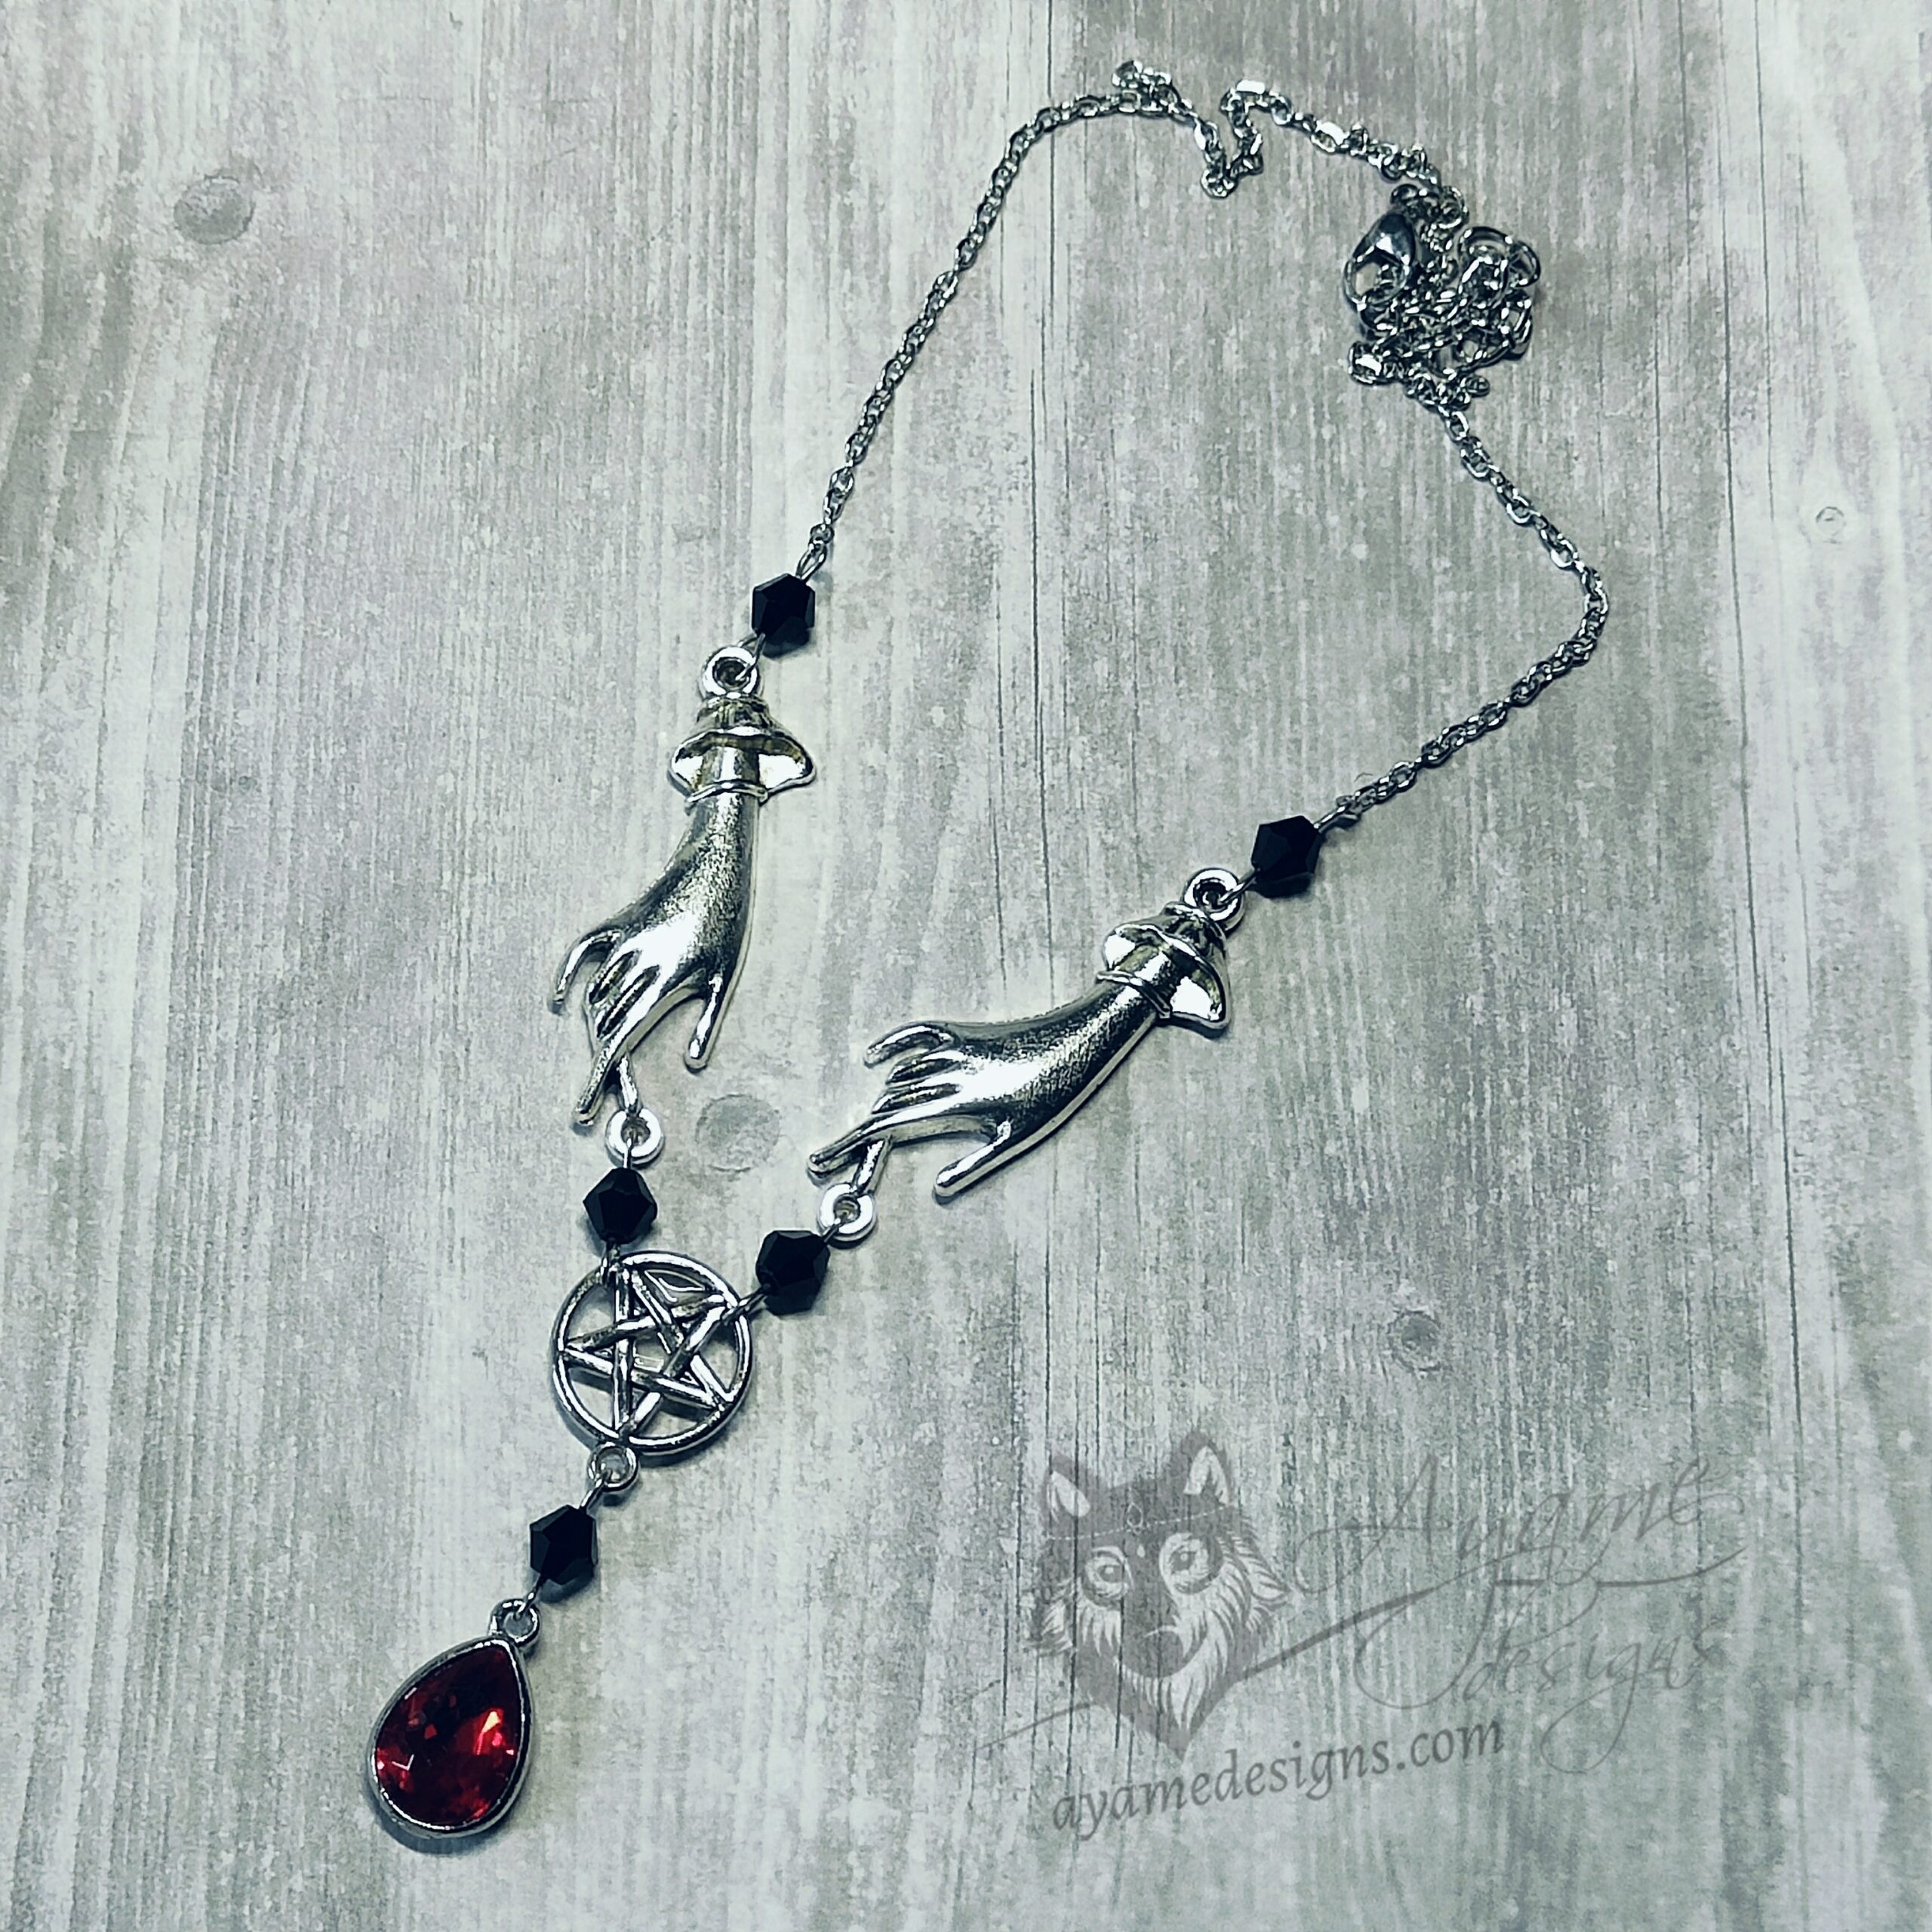 Adjustable necklace with hand pendants, a pentacle connector and a red teardrop charm